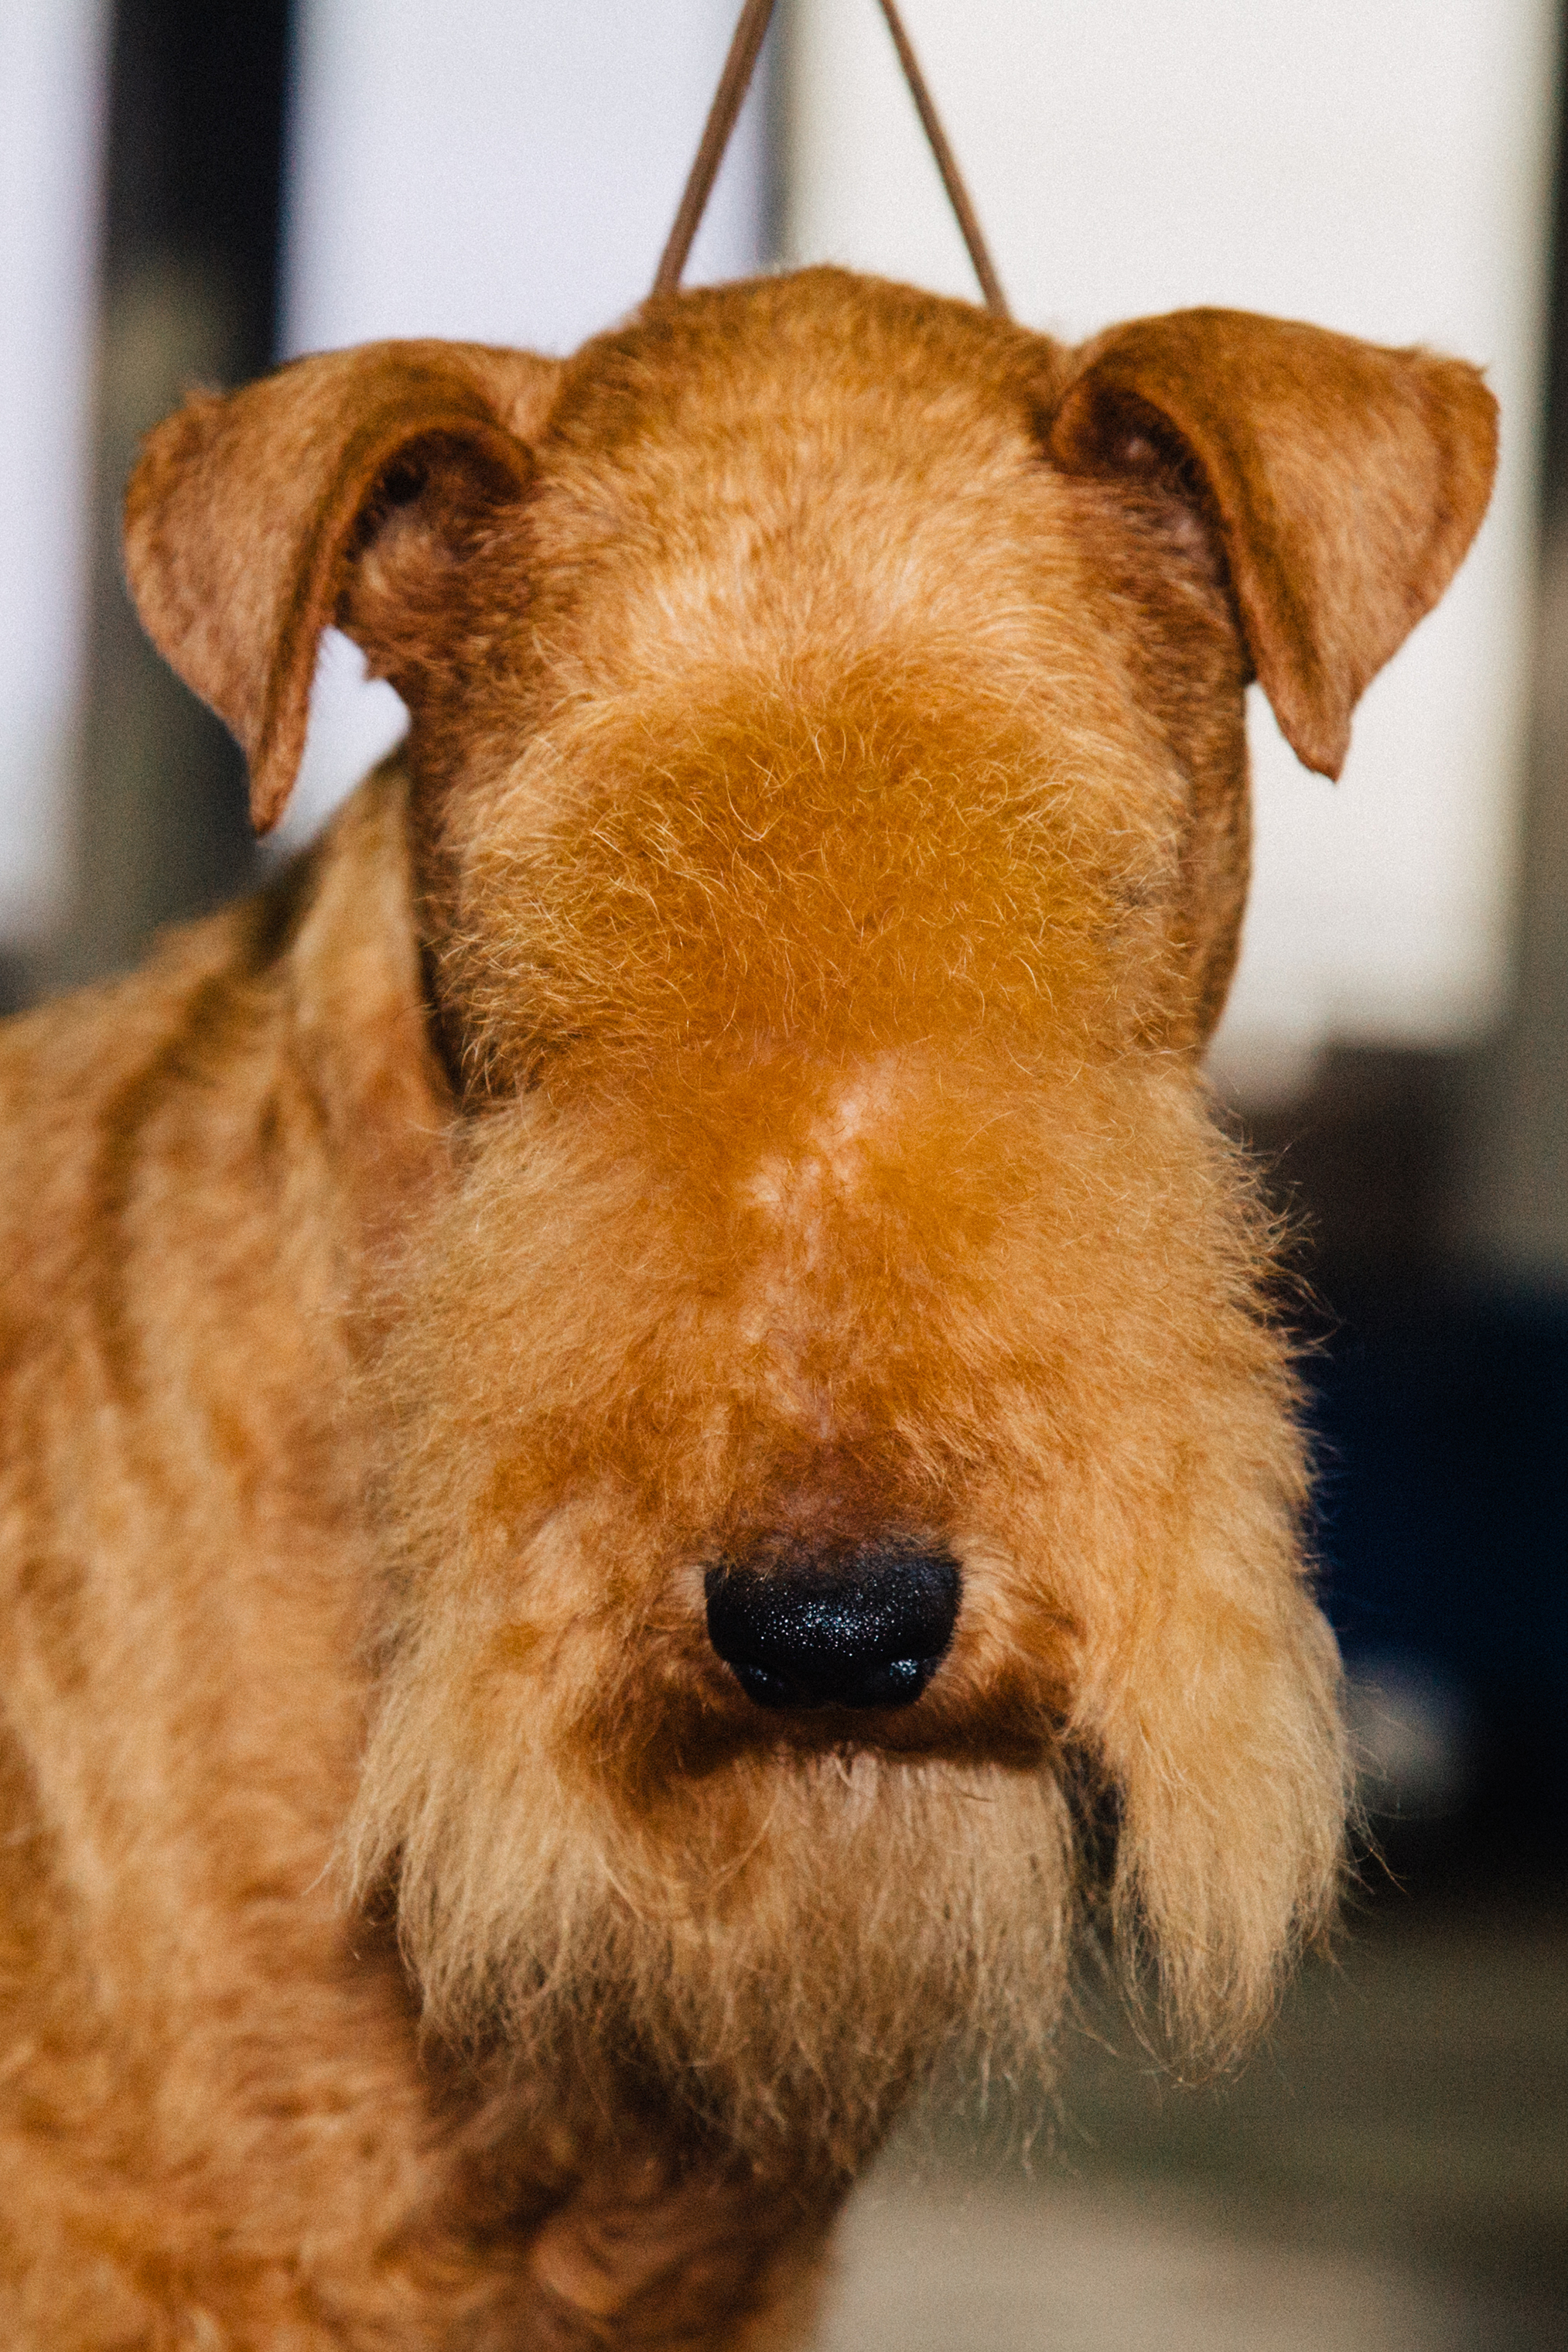 The Lakeland Terrier, a hypoallergenic dog originally bred in England, was one of dozens of terrier categories at Westminster (Clara Mokri for TIME)